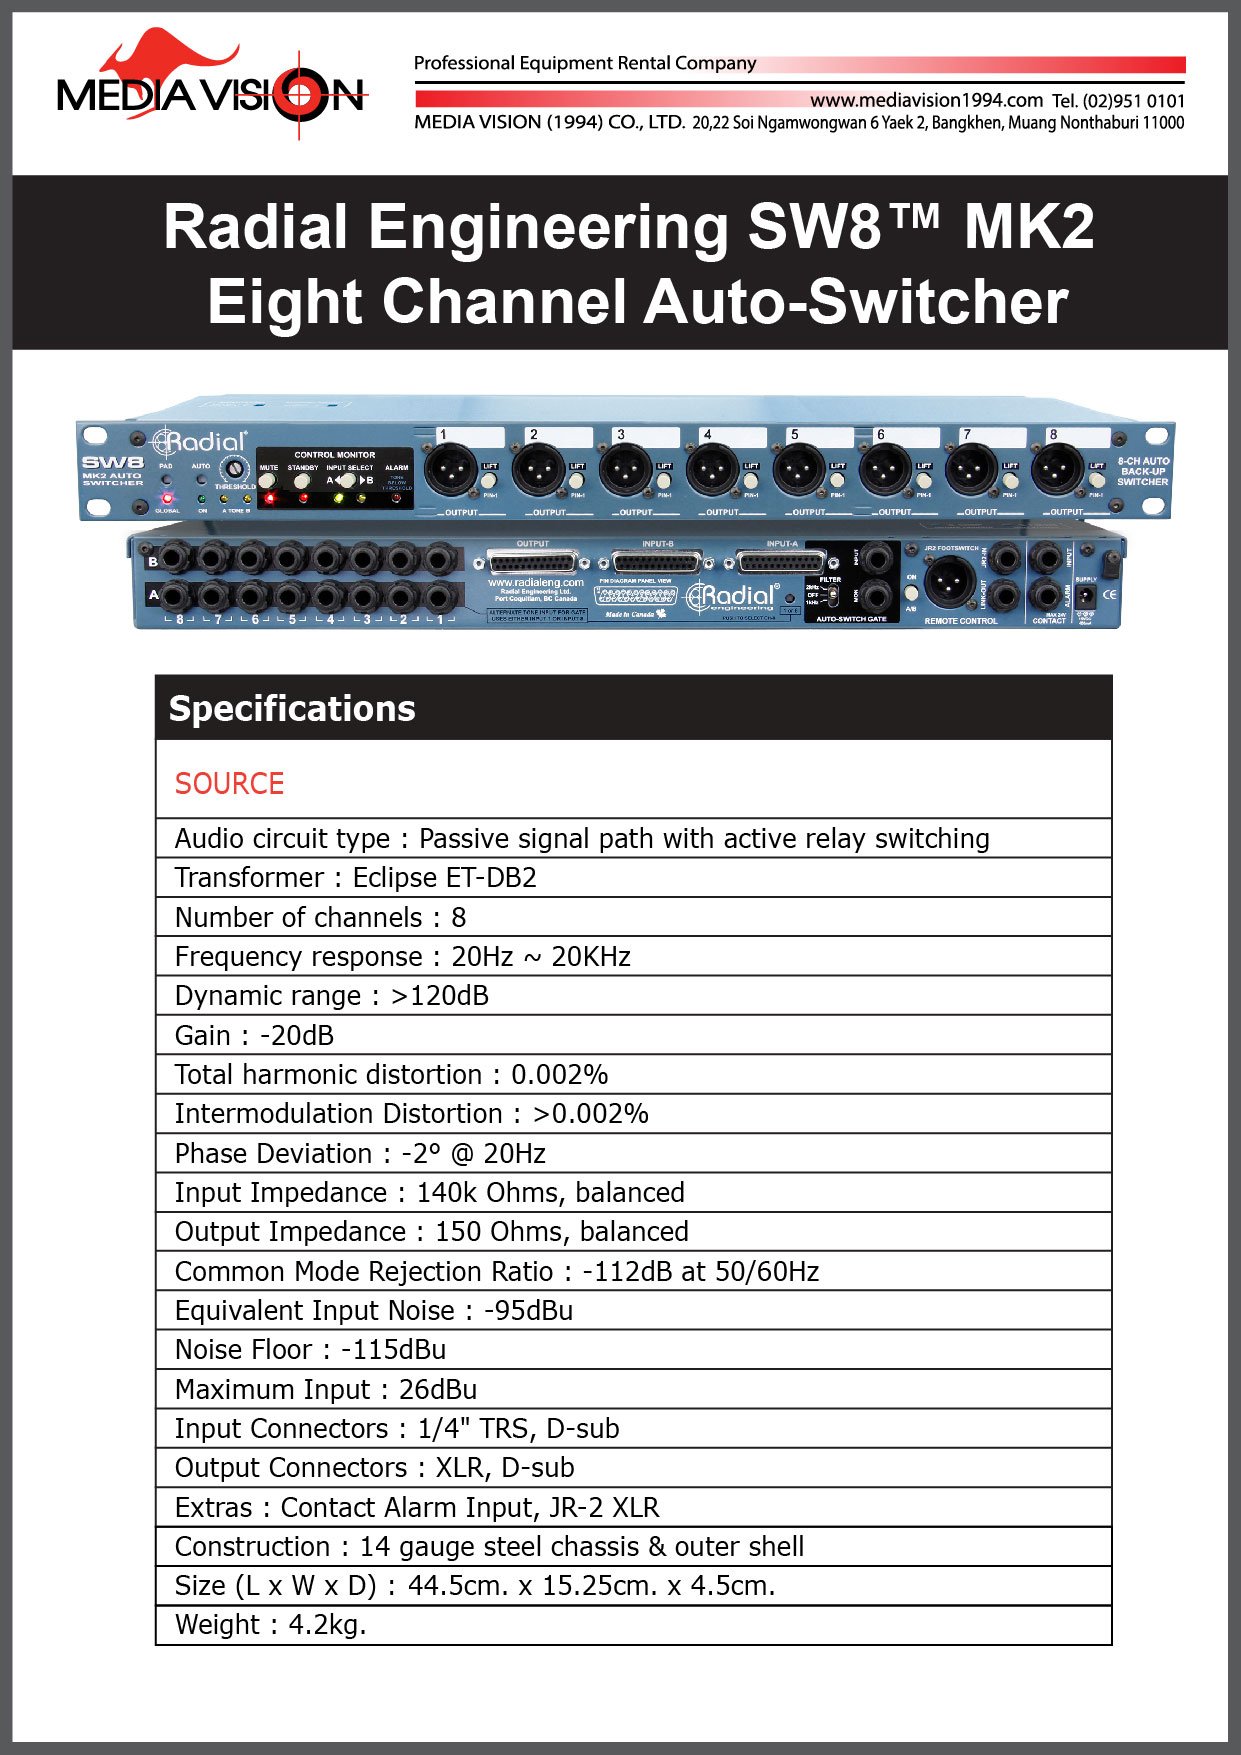 RADIAL ENGINEERING SW8 MK2 EIGHT CHANNEL AUTO-SWITHCHER